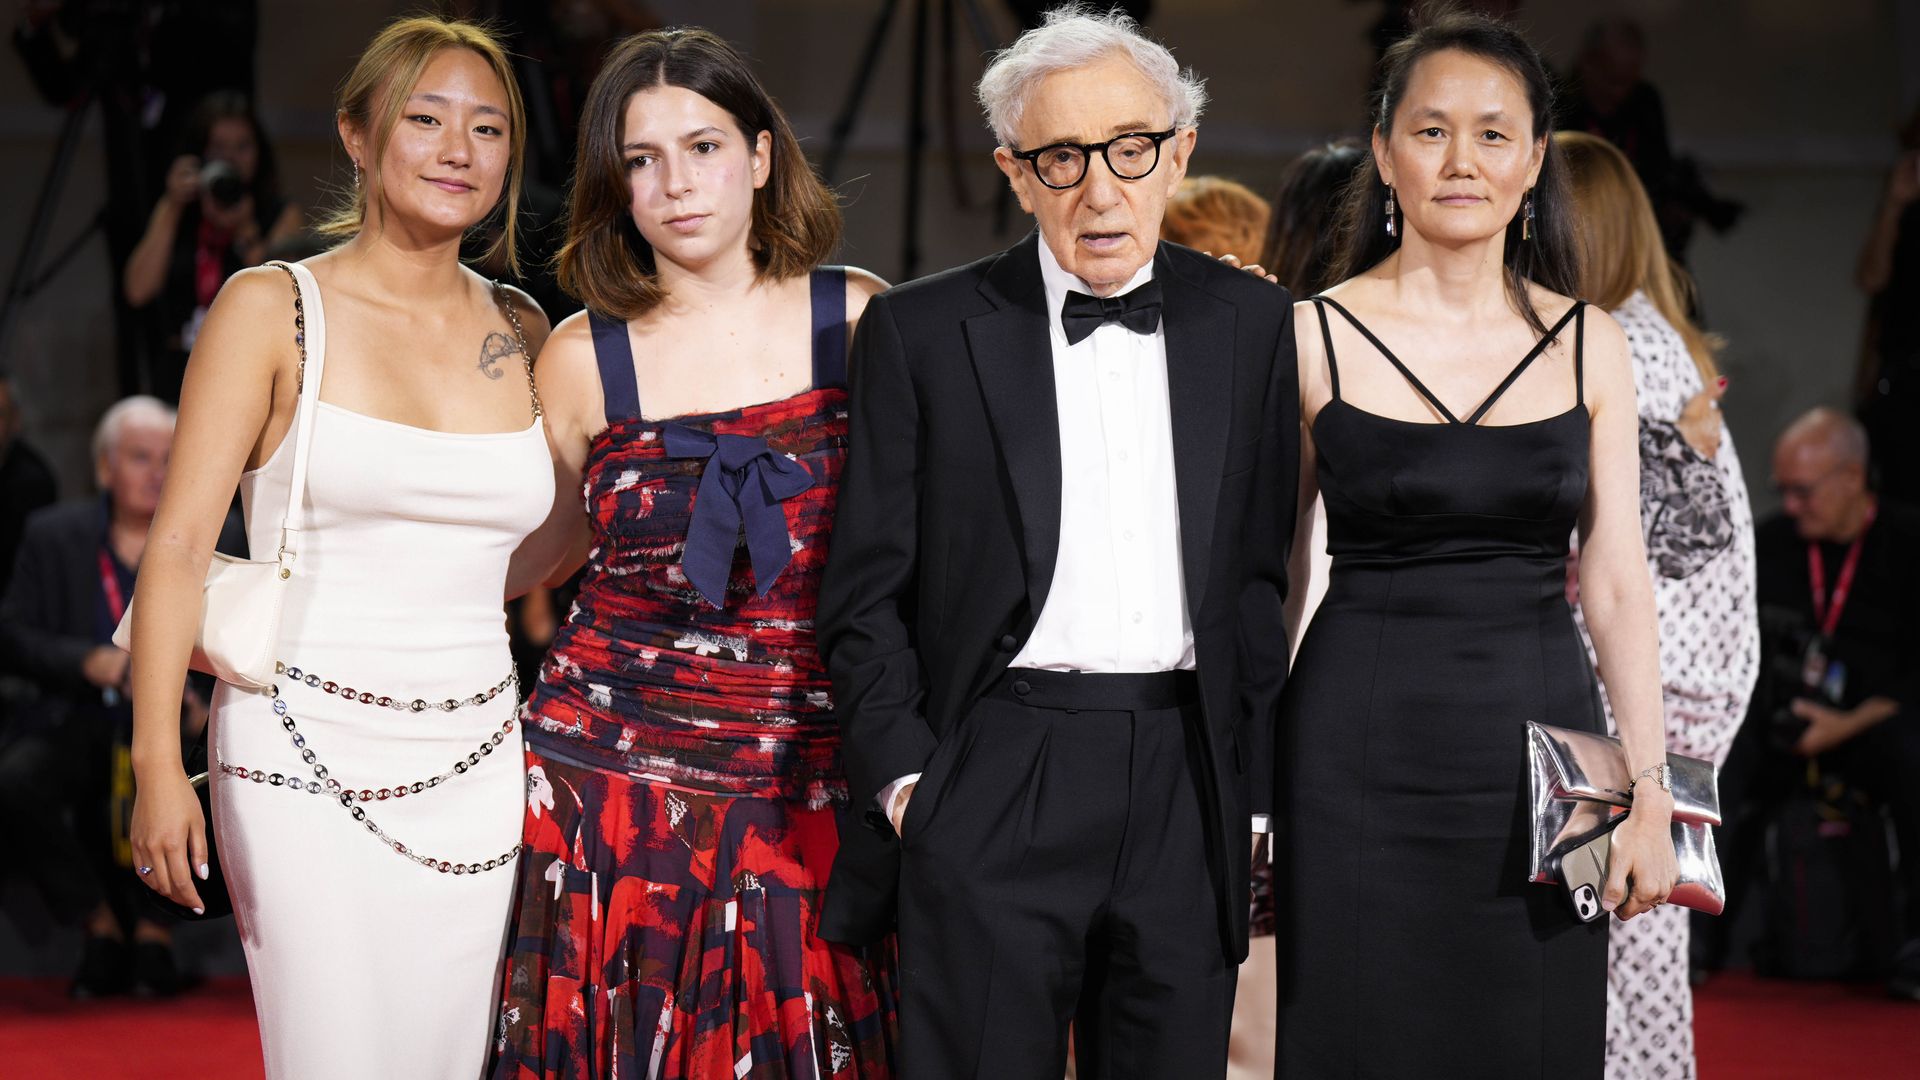 Woody Allen's family supporting him on the red carpet in Venice